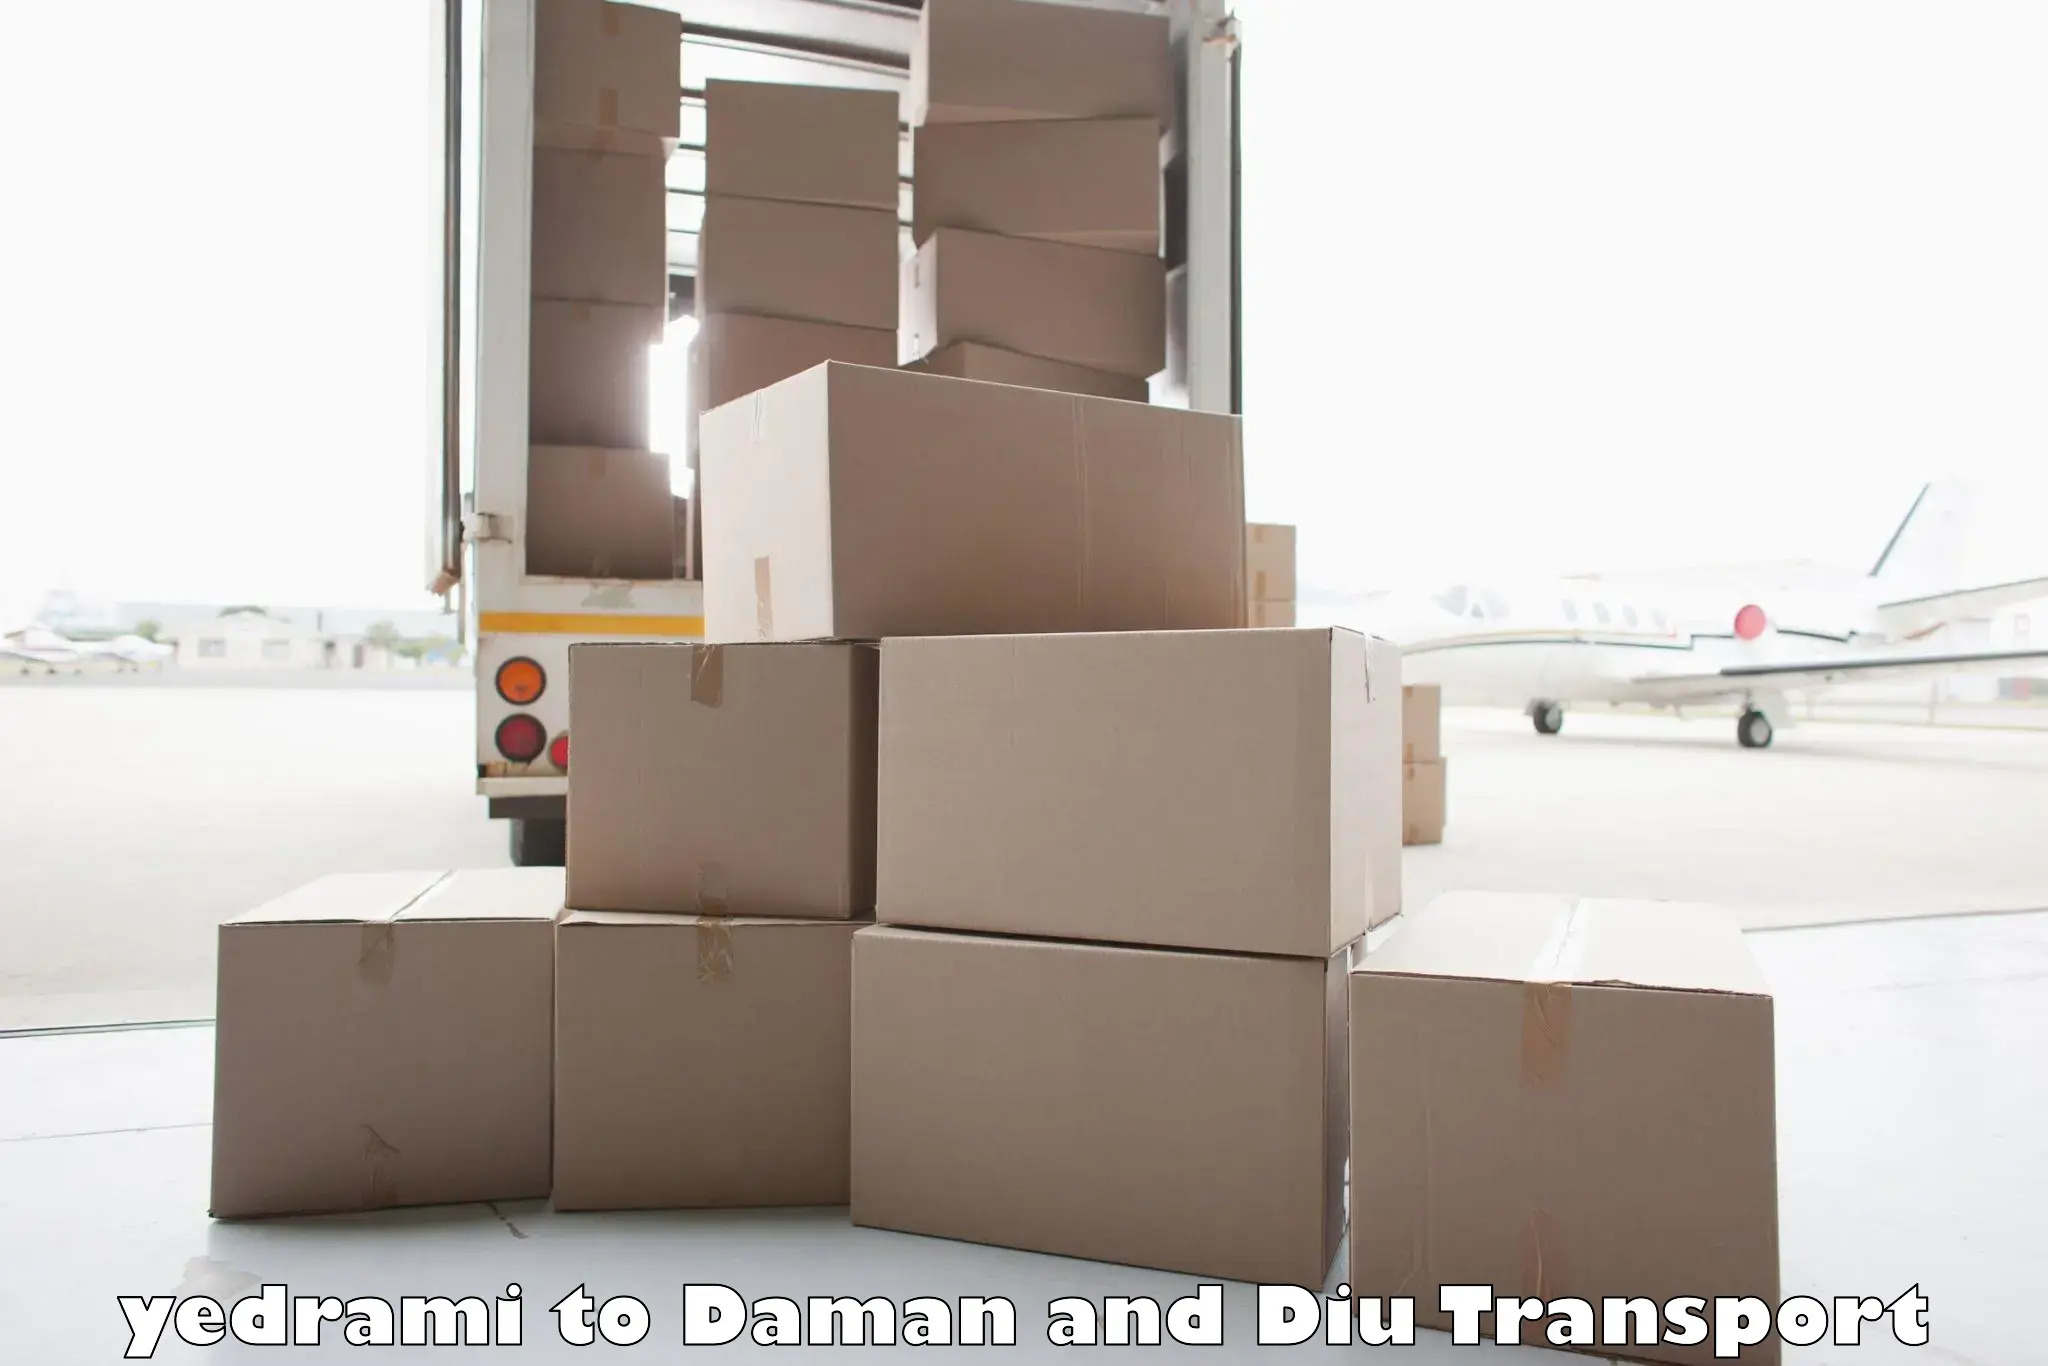 Luggage transport services in yedrami to Daman and Diu